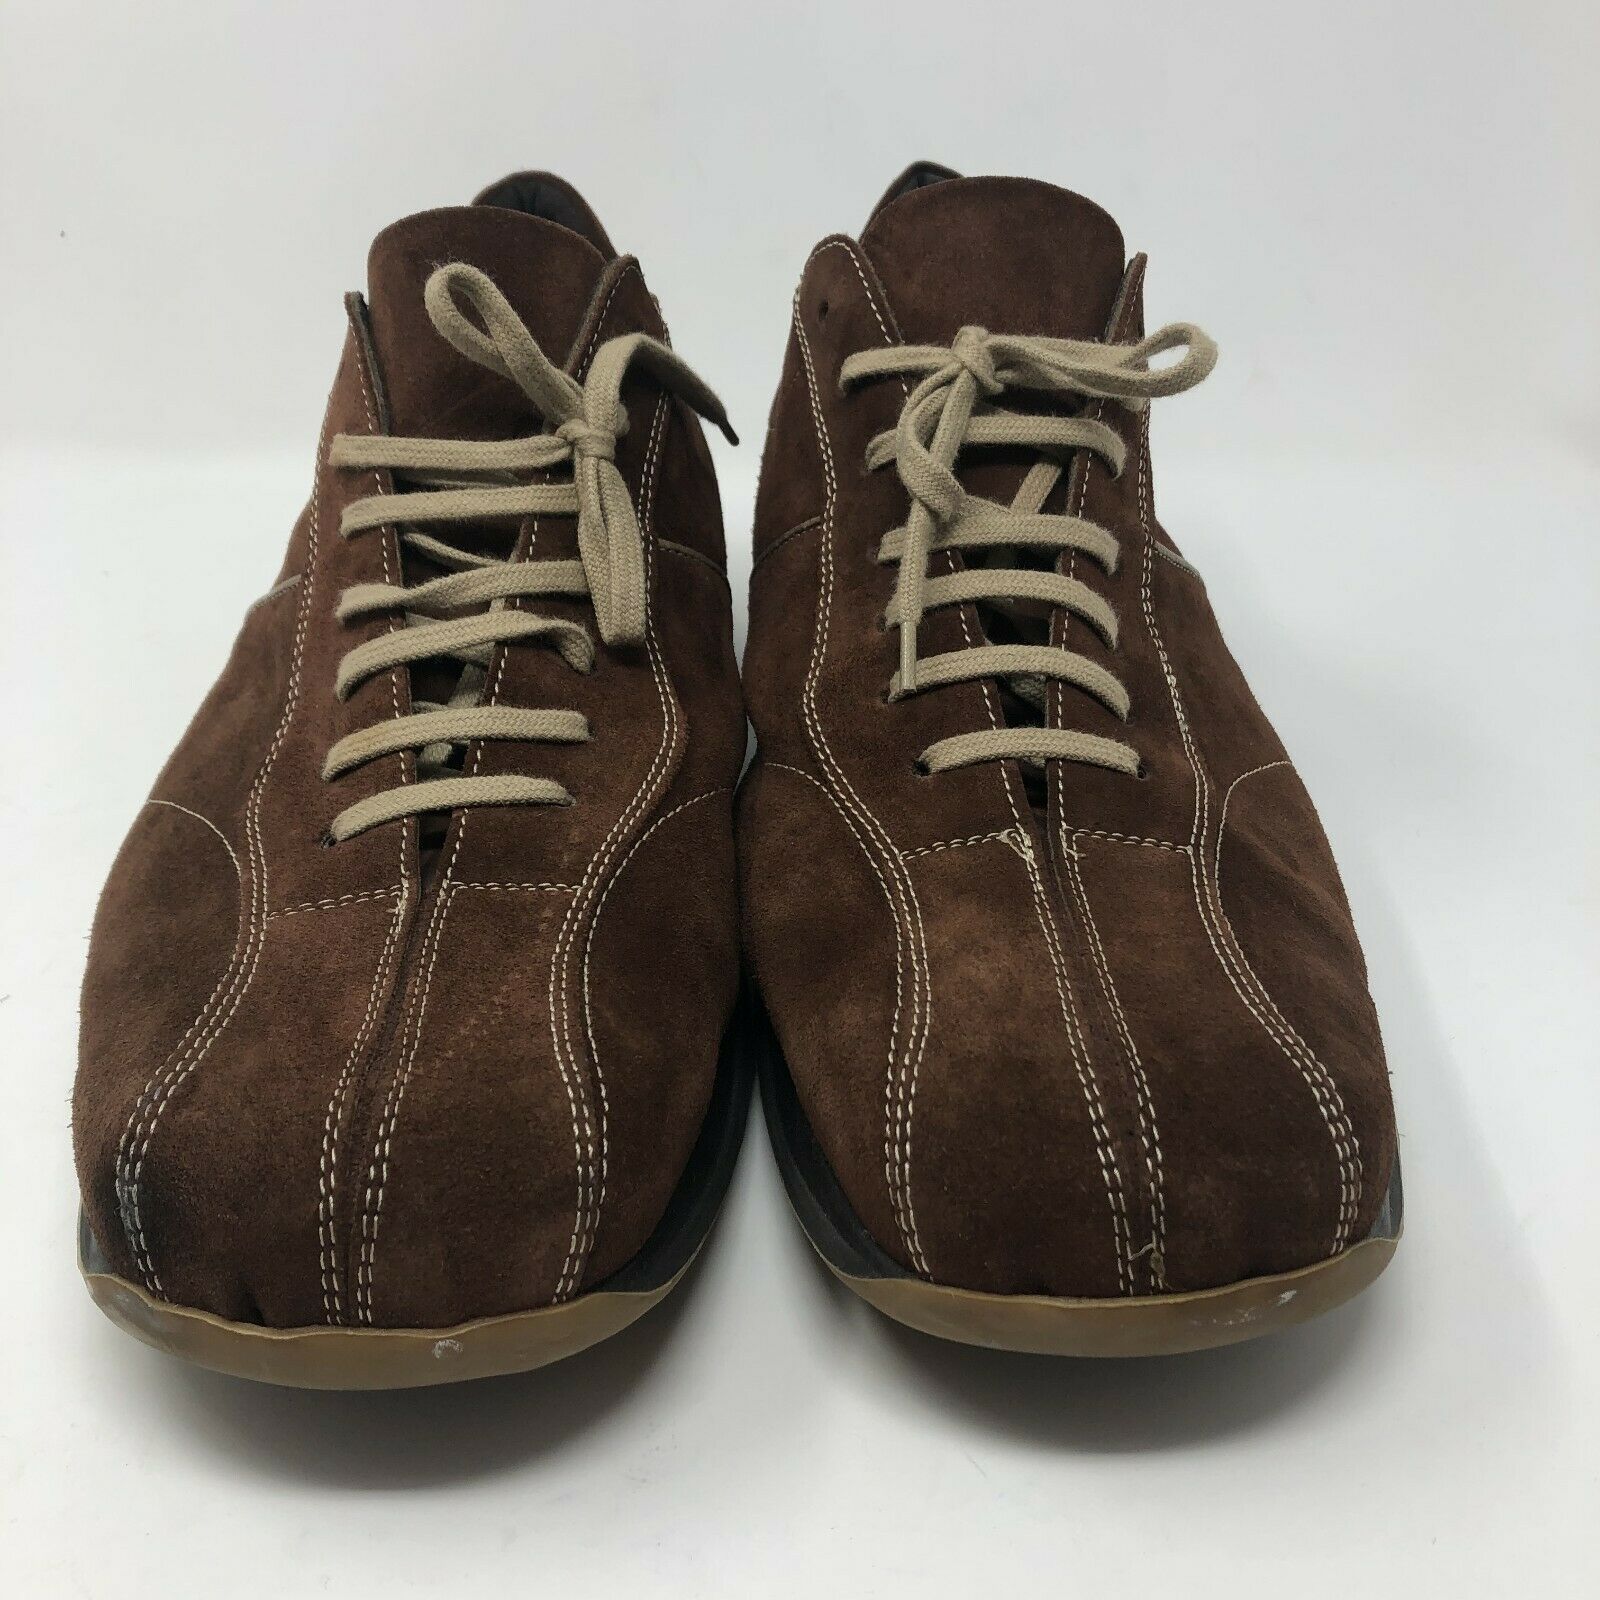 Bacco Bucci Oxford Dress Shoes Mens Size 16 Brown Suede Leather EUC ...